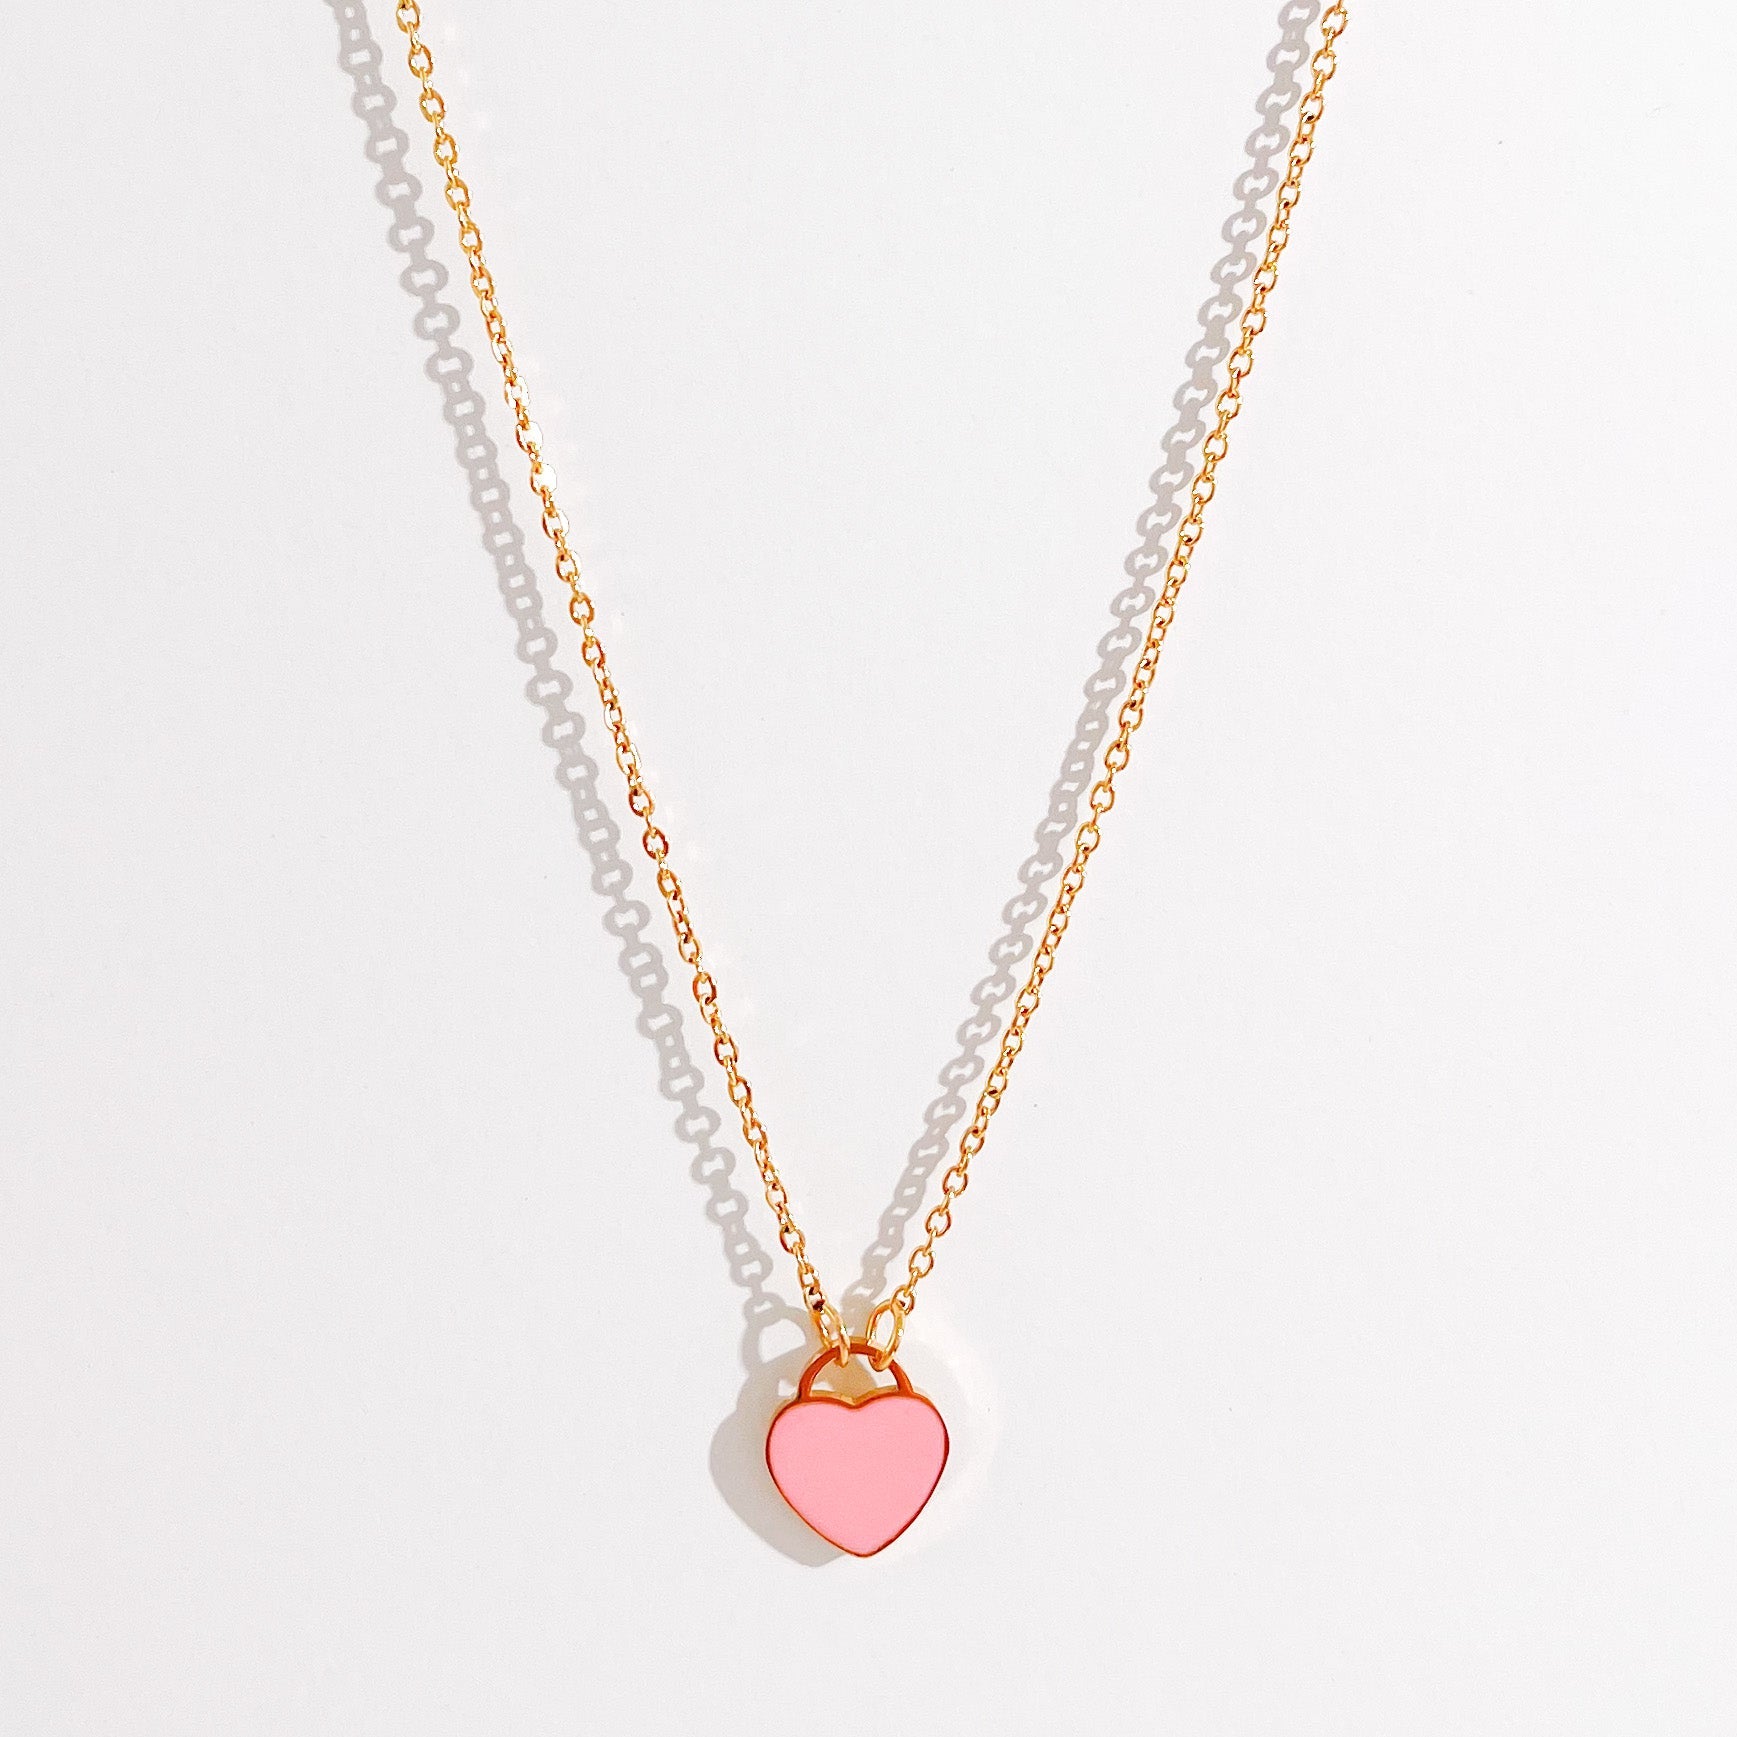 Enamel Heart Necklaces in Gold (Not A Set) - Flaire & Co.